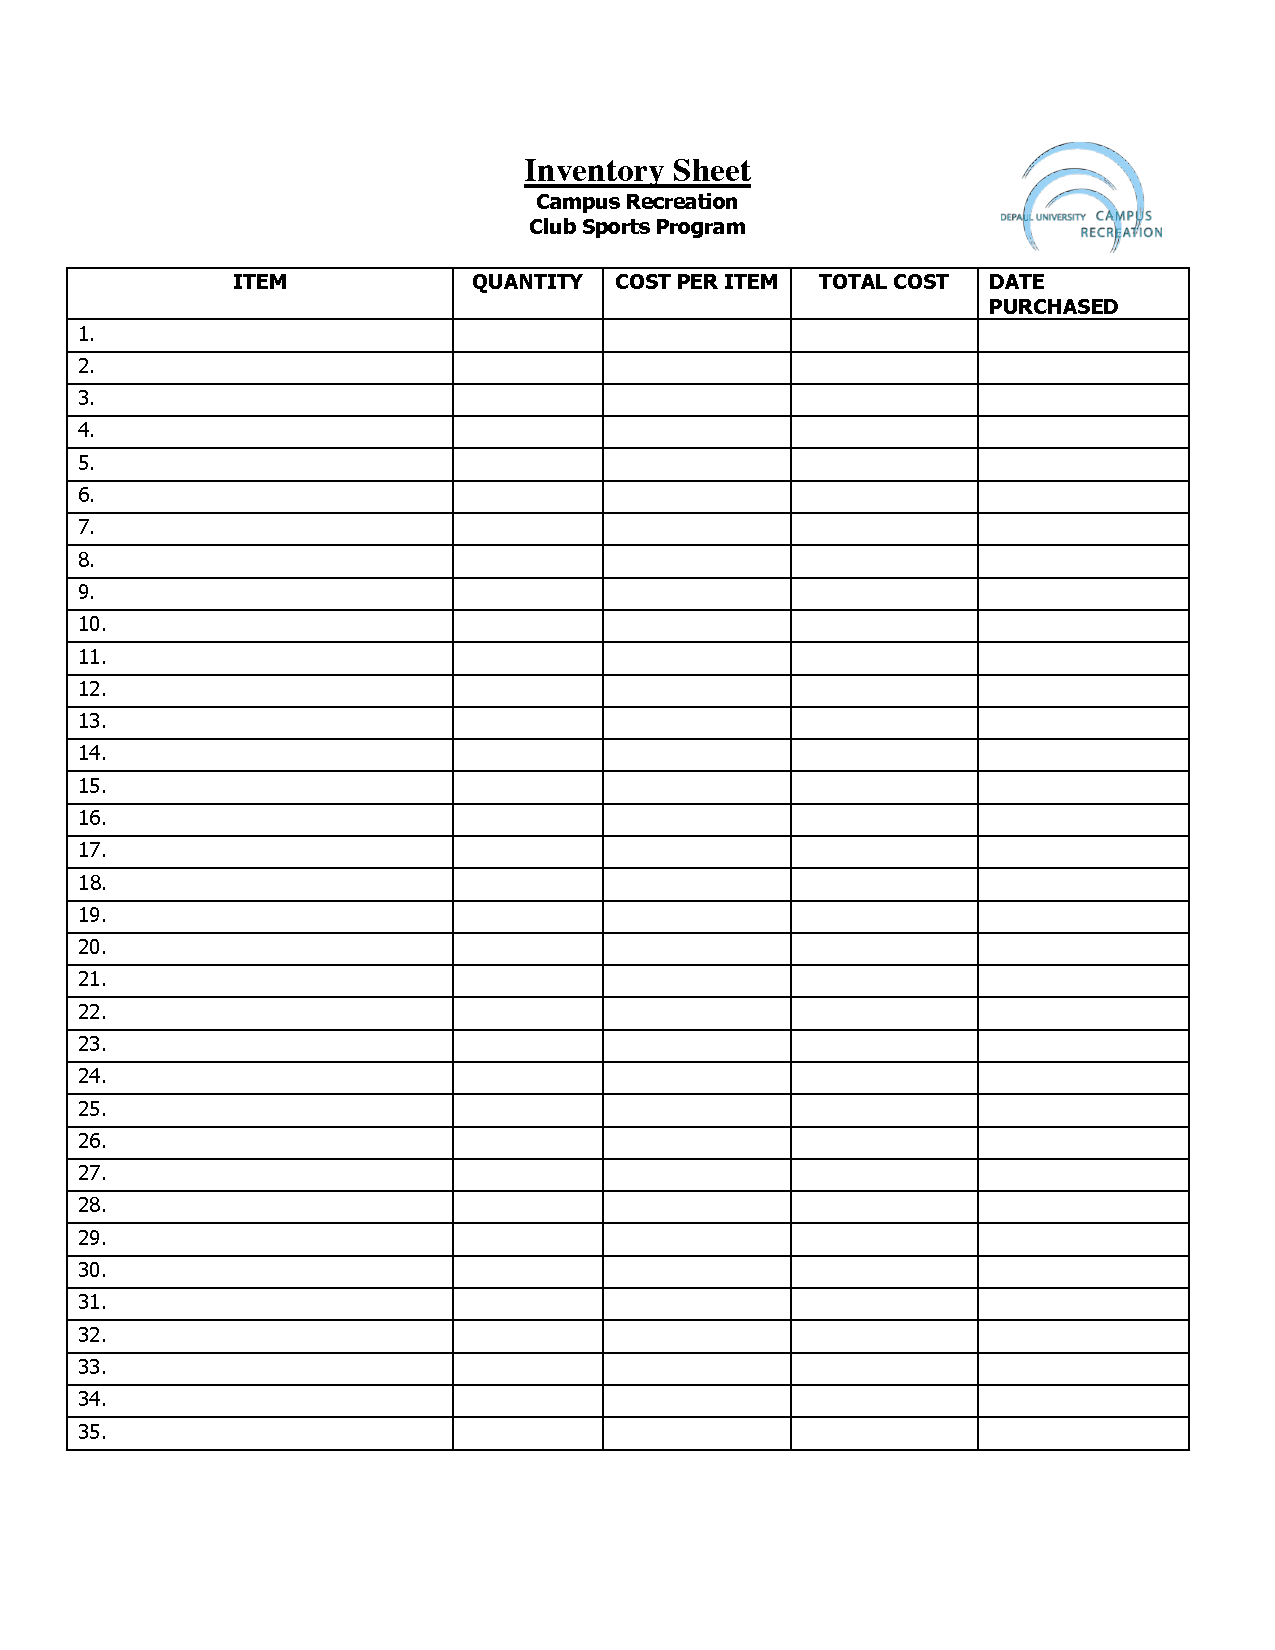 Free Printable Inventory Sheets | Inventory Sheet - Doc | Ideas - Free Printable Forms For Organizing